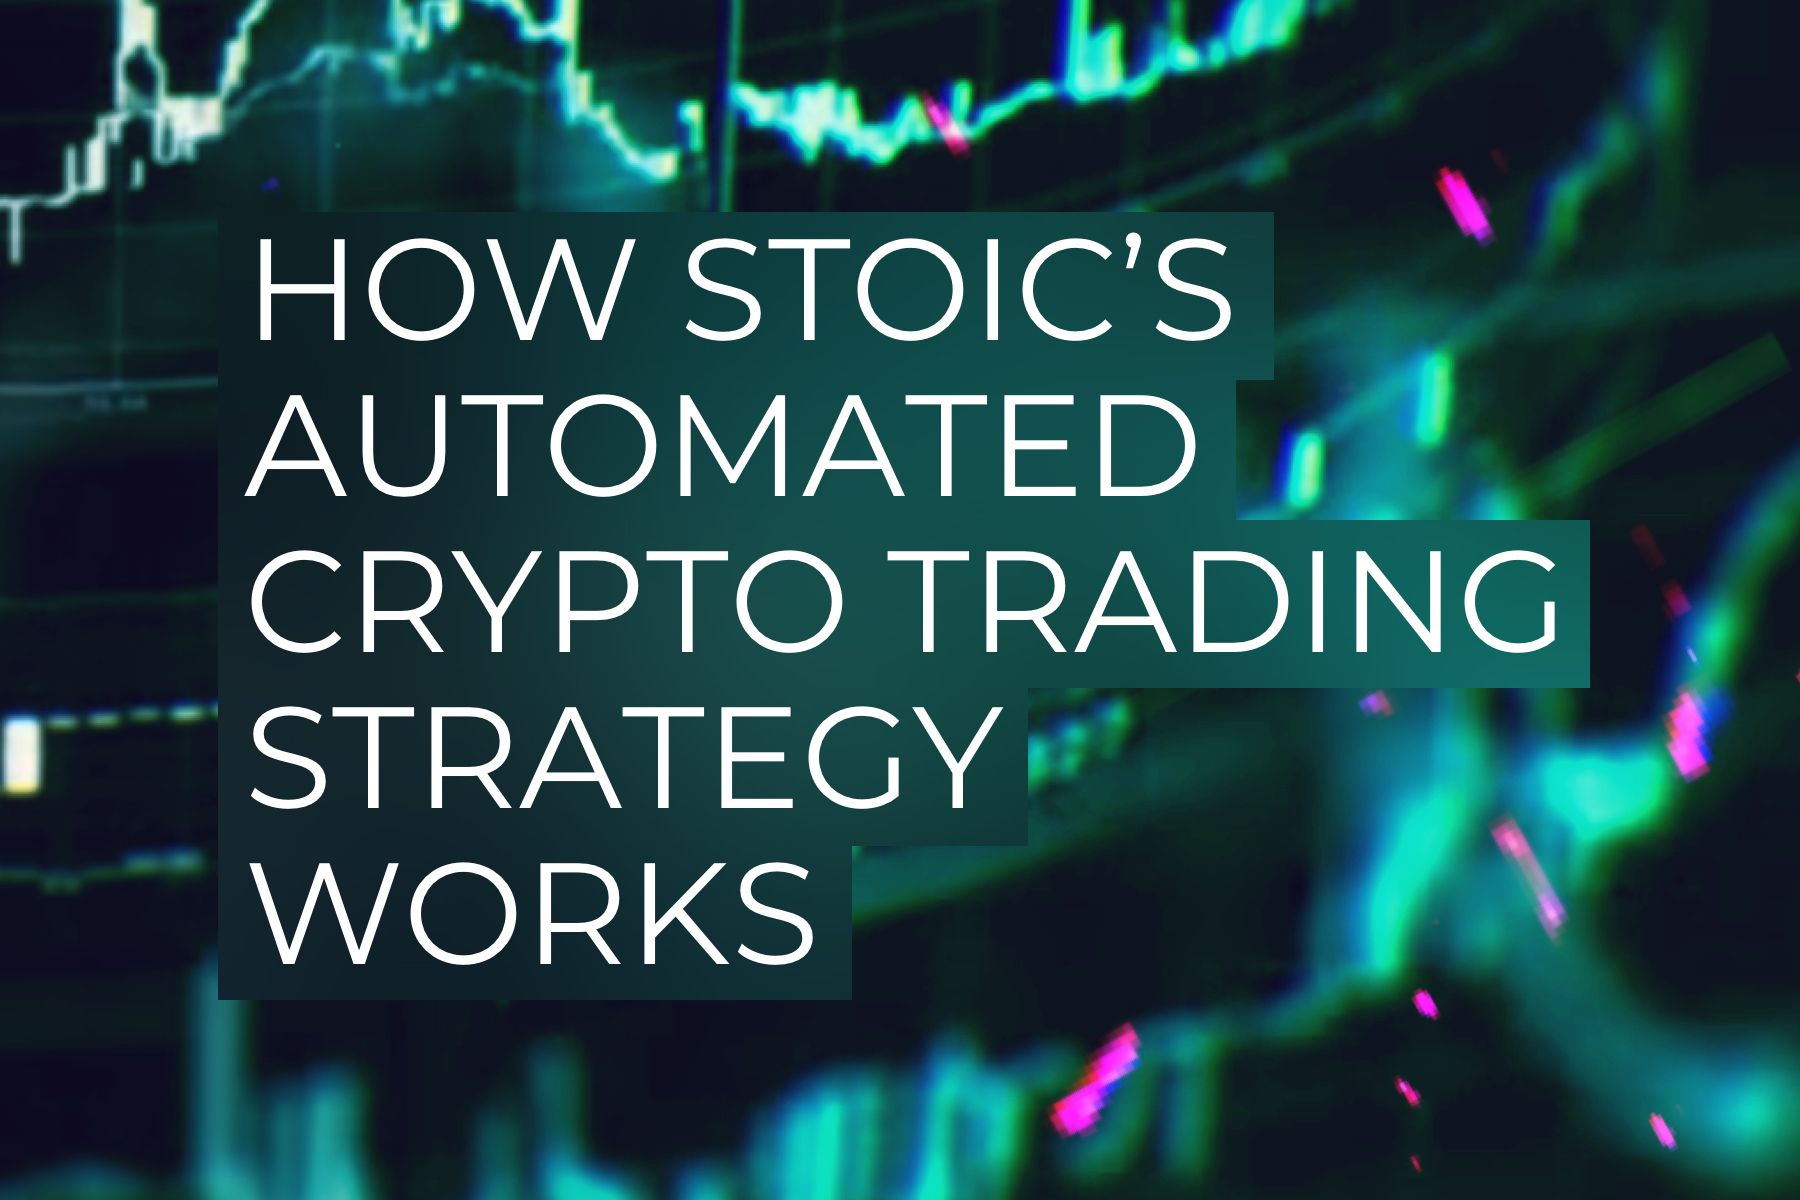 How Stoic’s Automated Crypto Trading Strategy Works